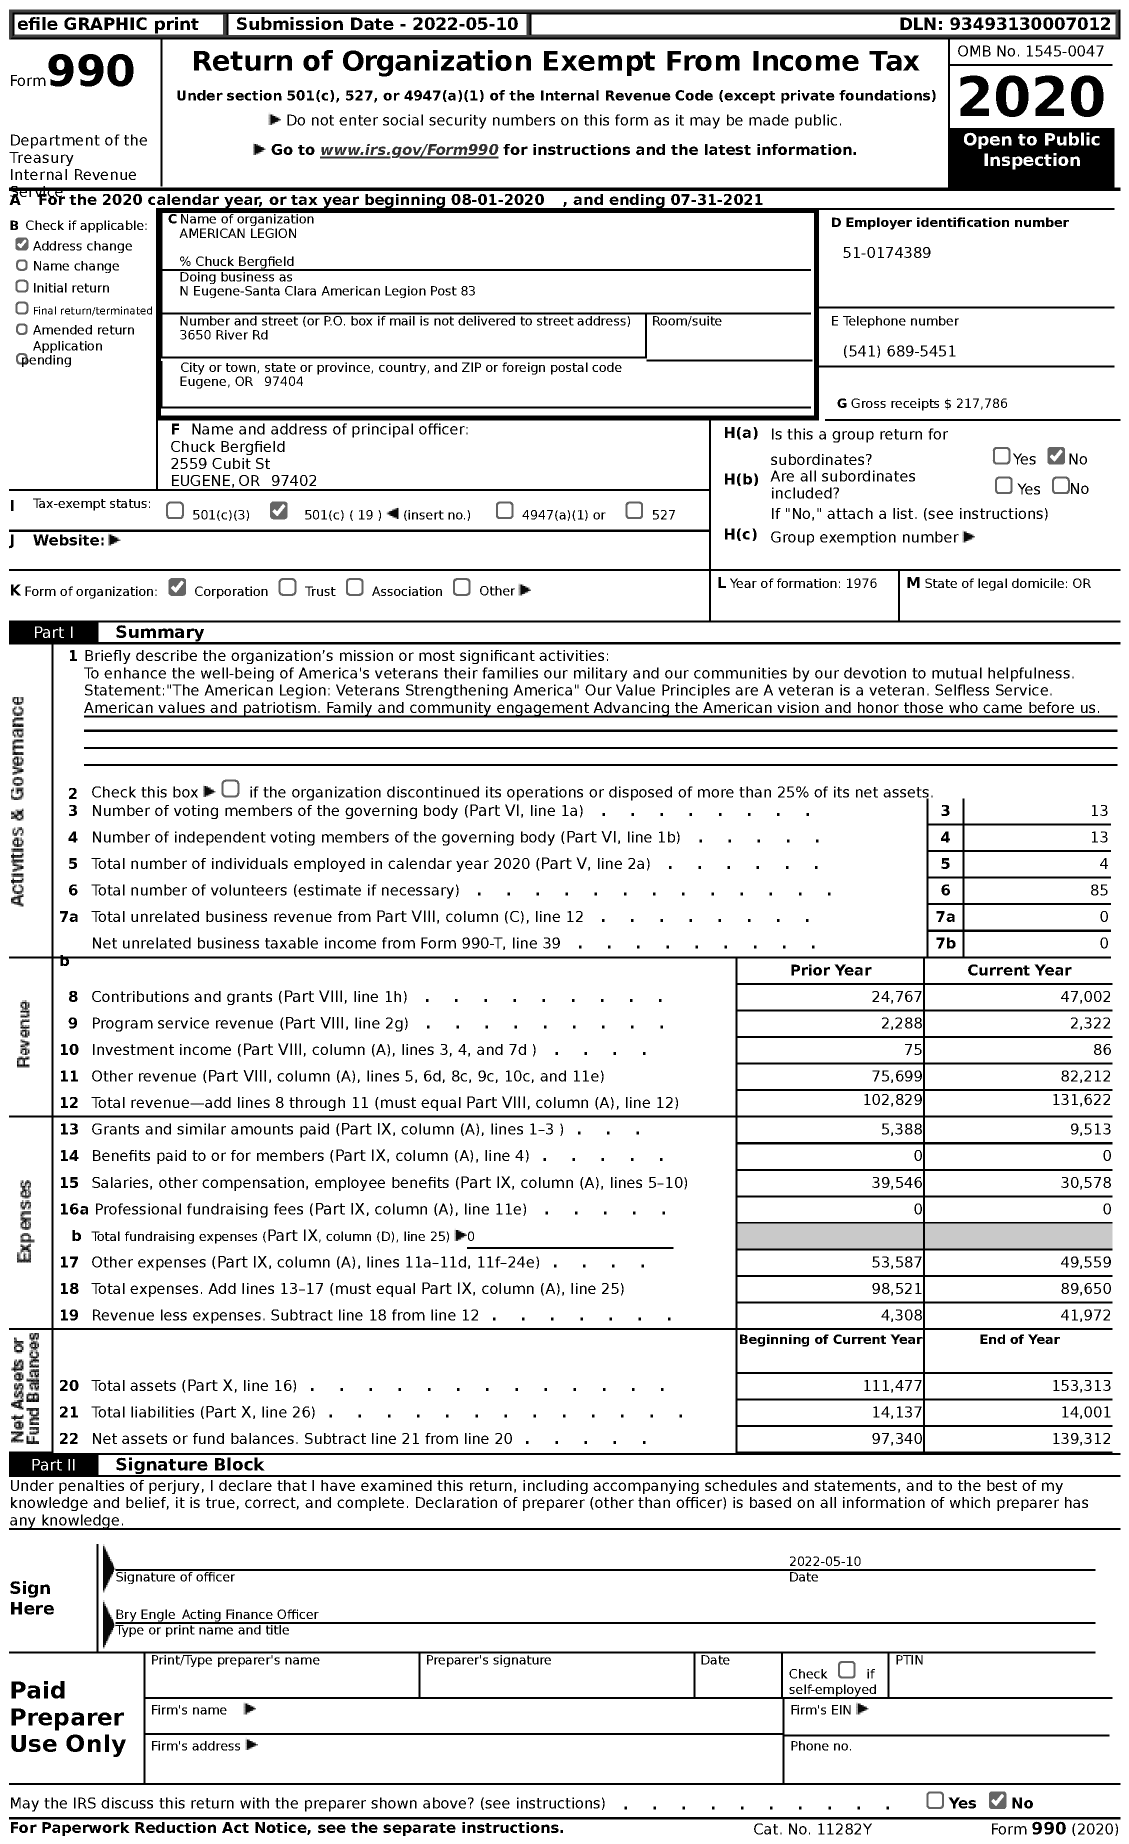 Image of first page of 2020 Form 990 for American Legion - American Legion 83 North Eugene-Santa Clara